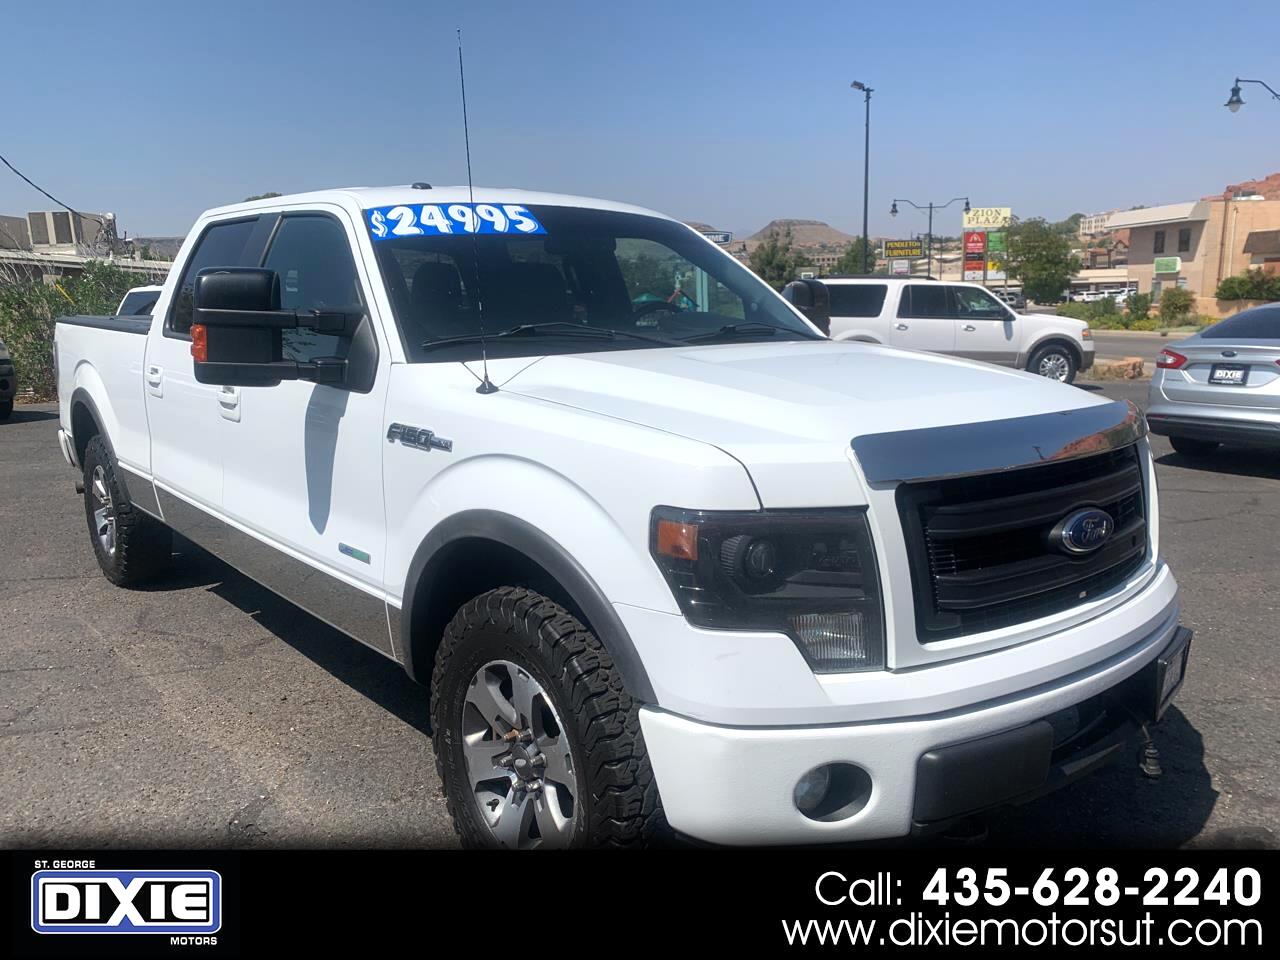 Ford F-150 FX4 SuperCrew 6.5-ft. Bed 4WD 2013